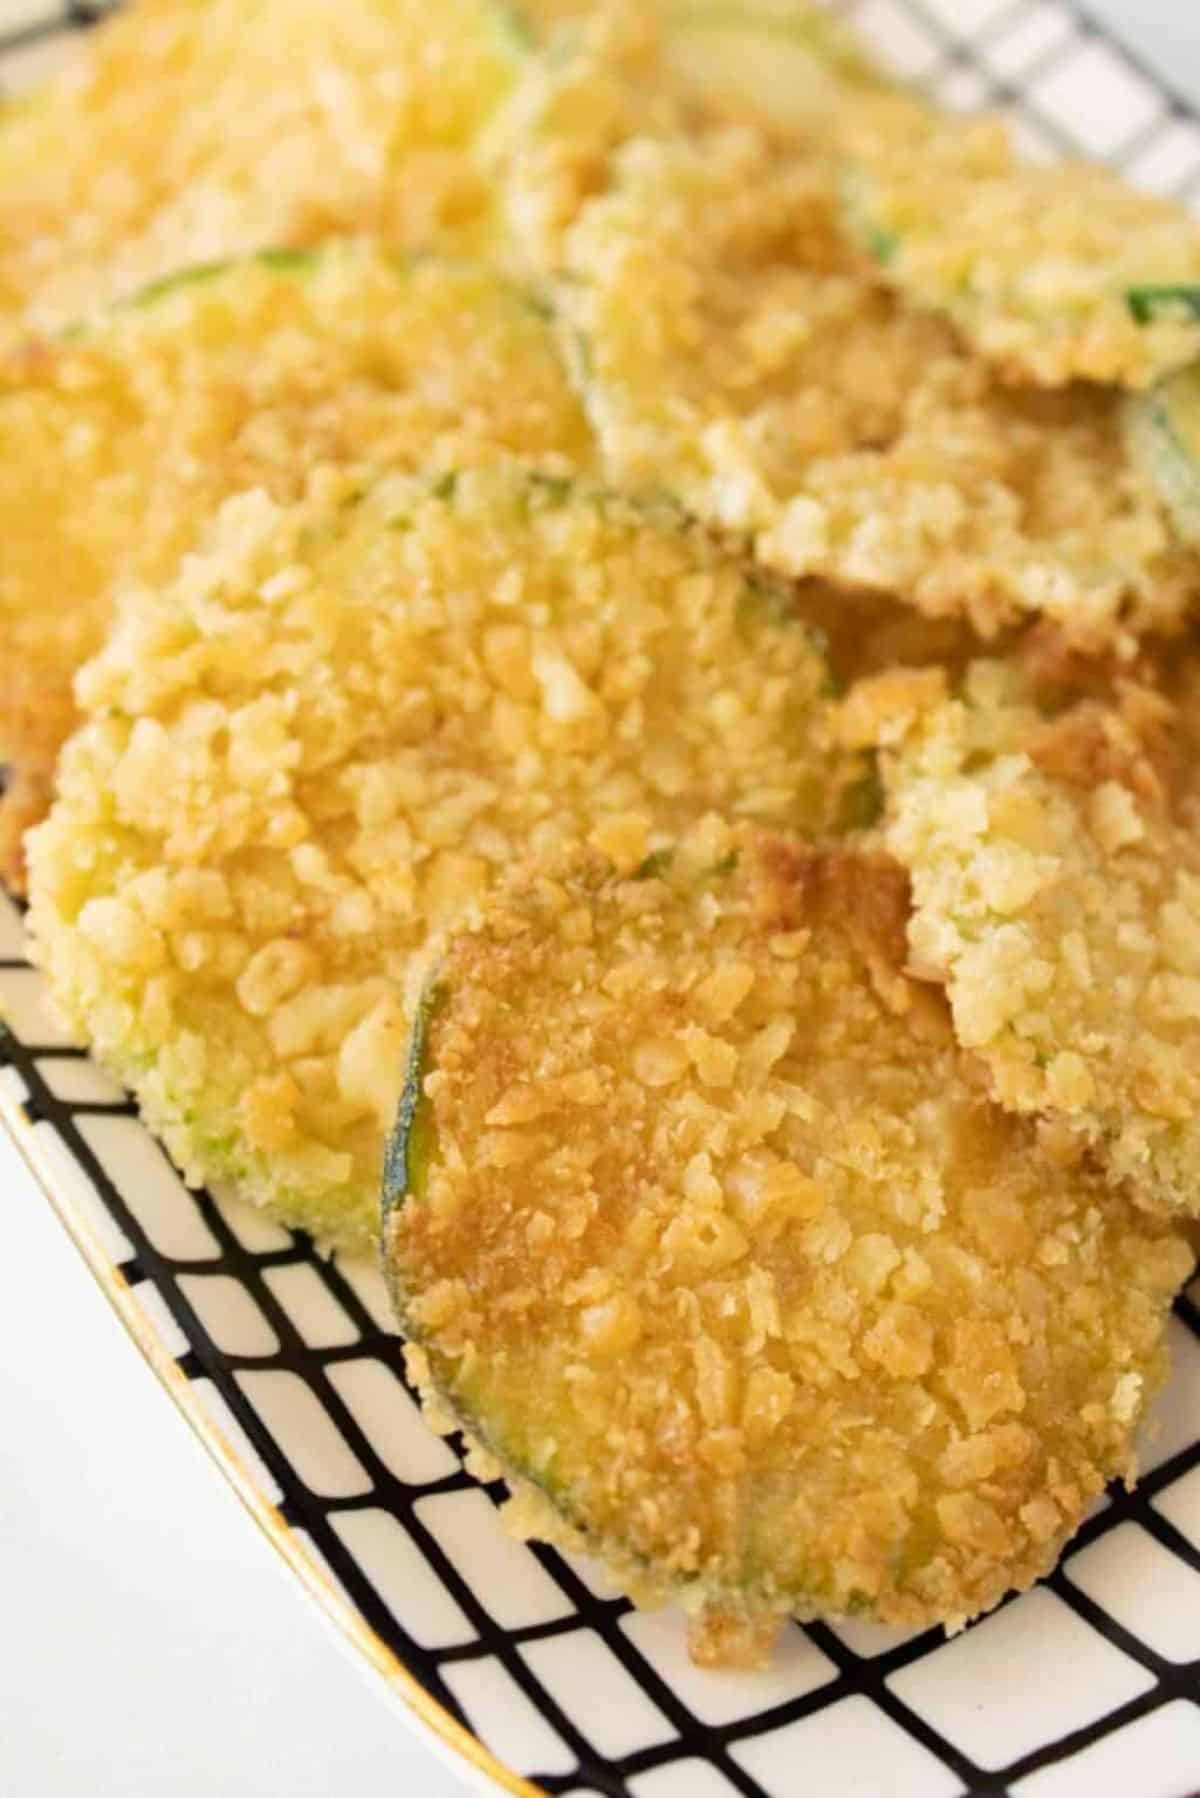 Crunchy Fried Zucchini Chips on a tray.